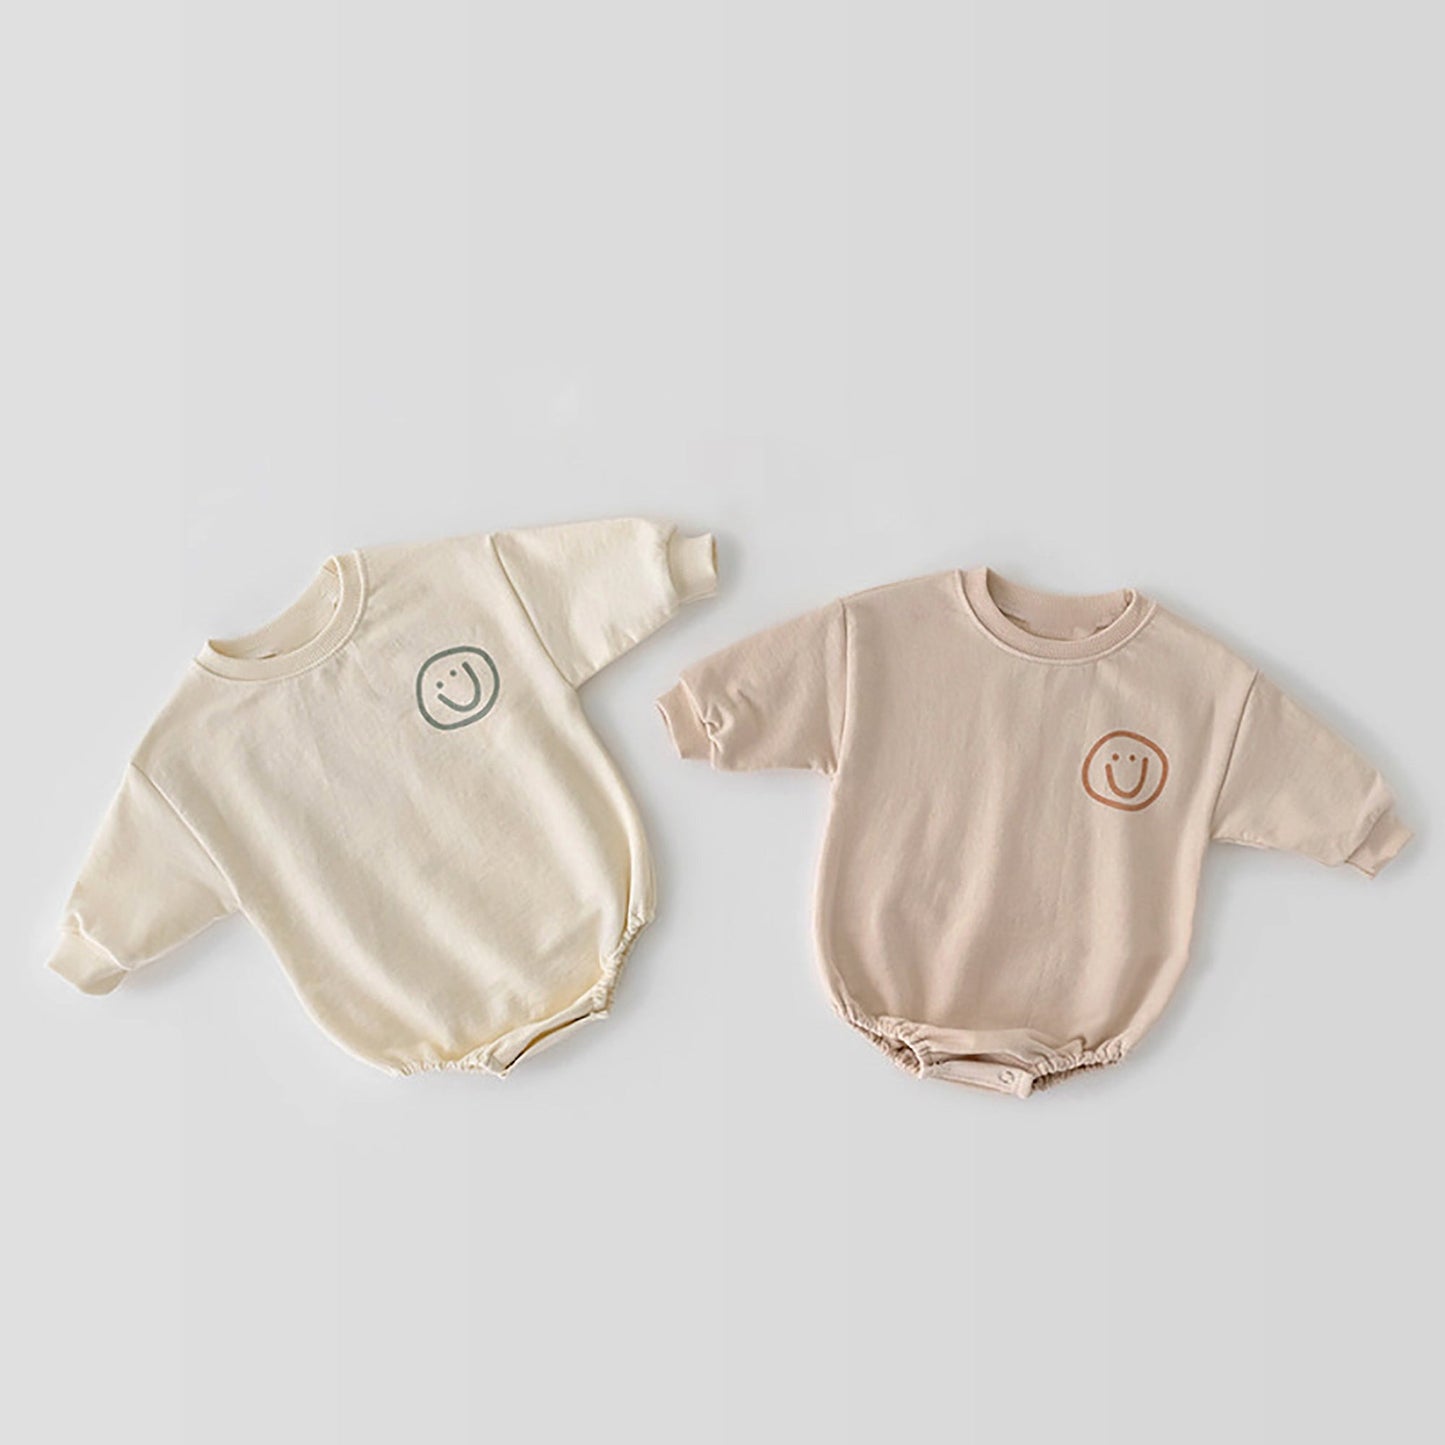 Beige Baby sweatshirt style romper and Rosey pink romper both the same style with smiley faces on the corner